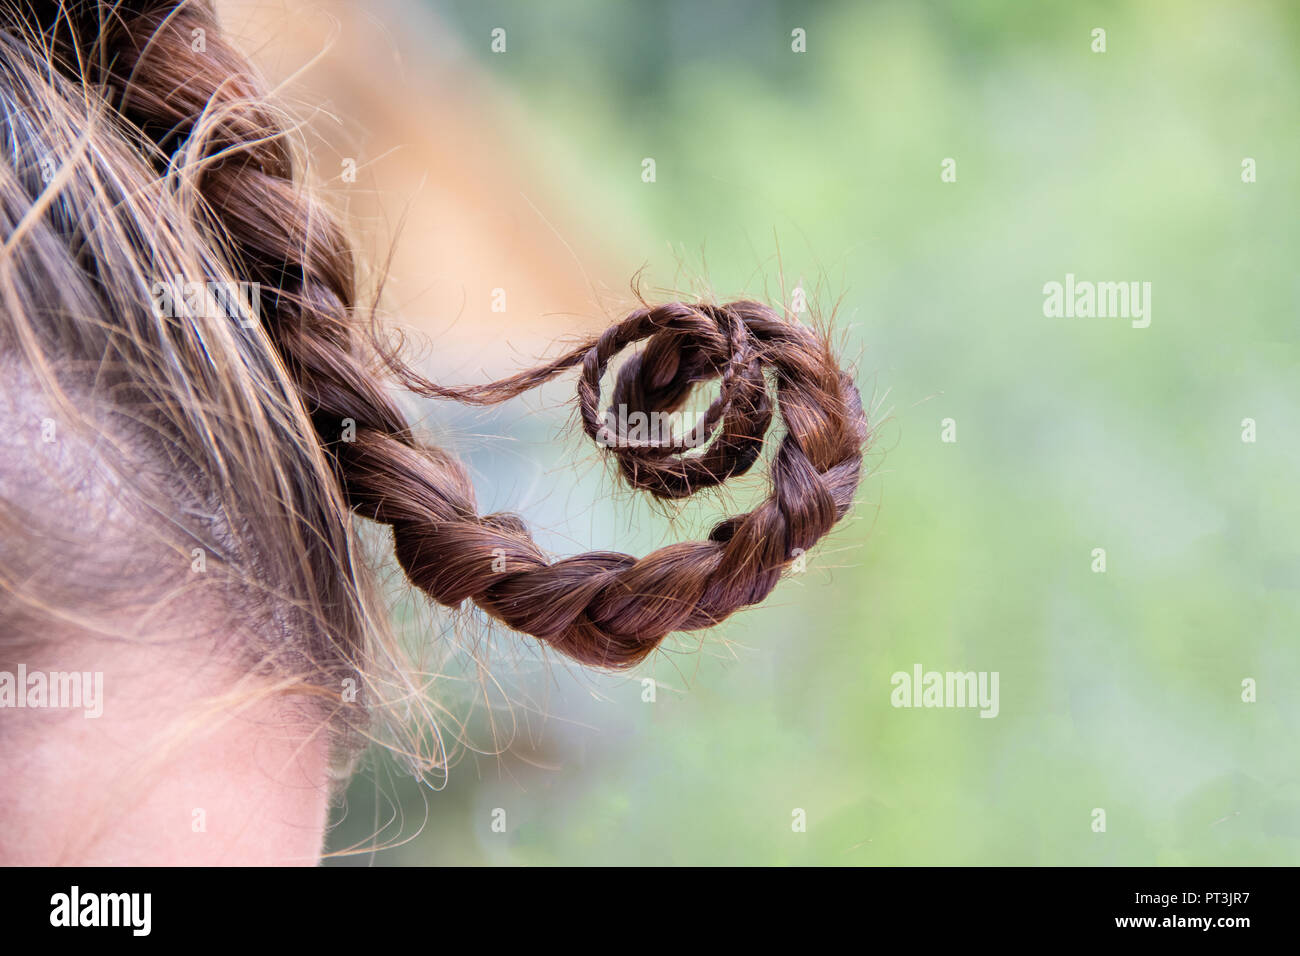 Funny pigtail hair twists on girl head on blurred background Stock Photo